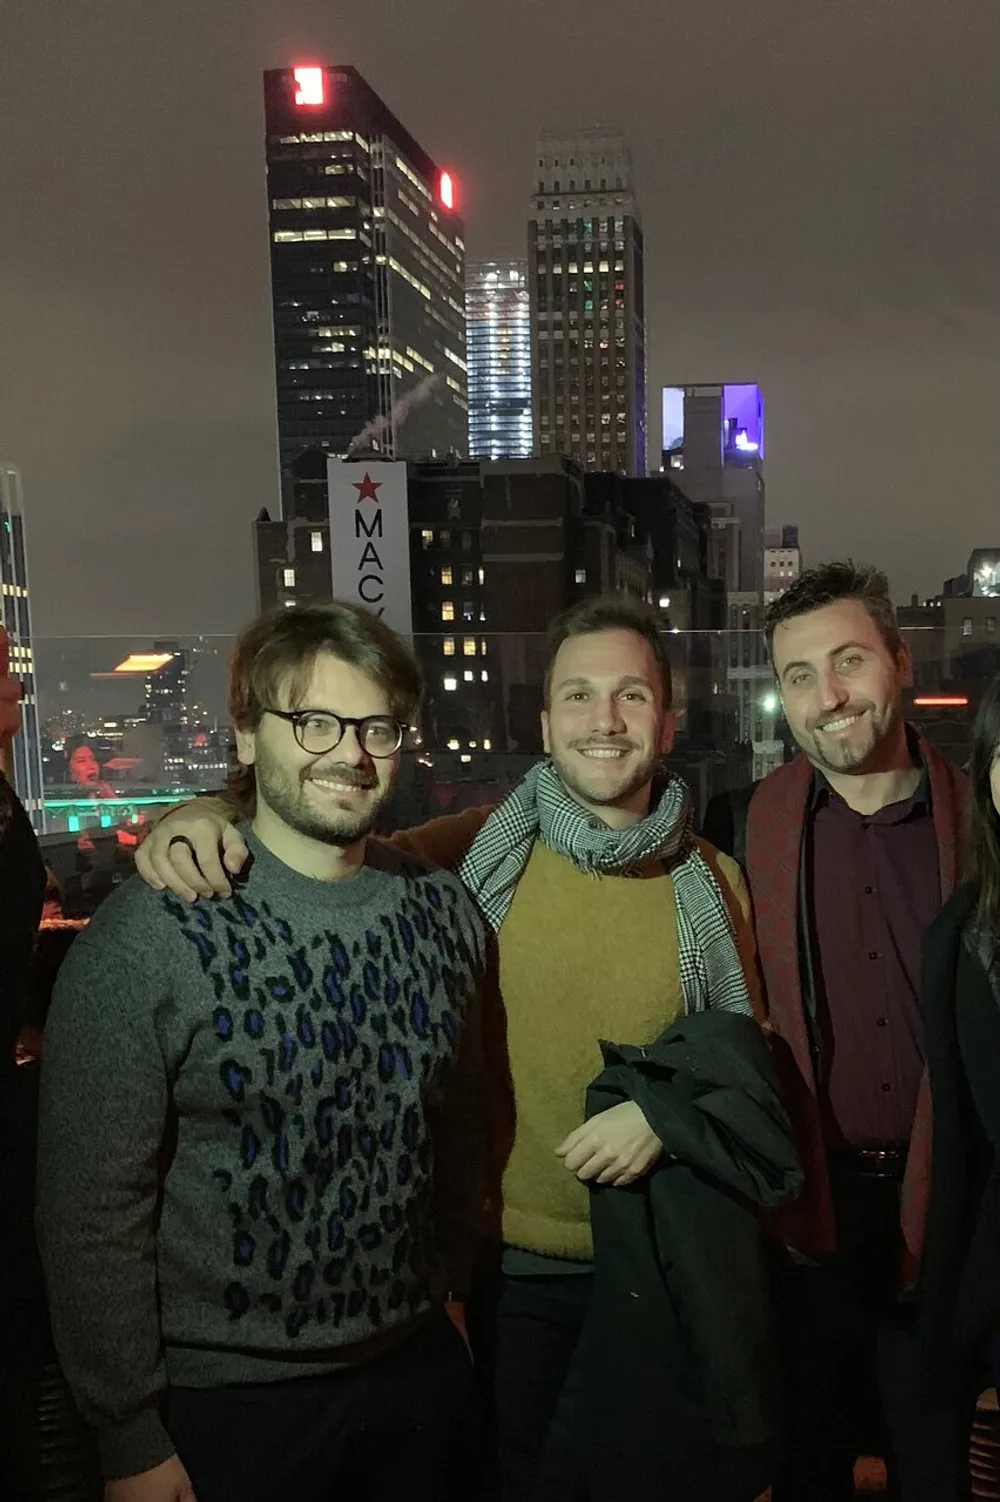 Three men are smiling for a photo on a rooftop at night with illuminated city buildings in the background